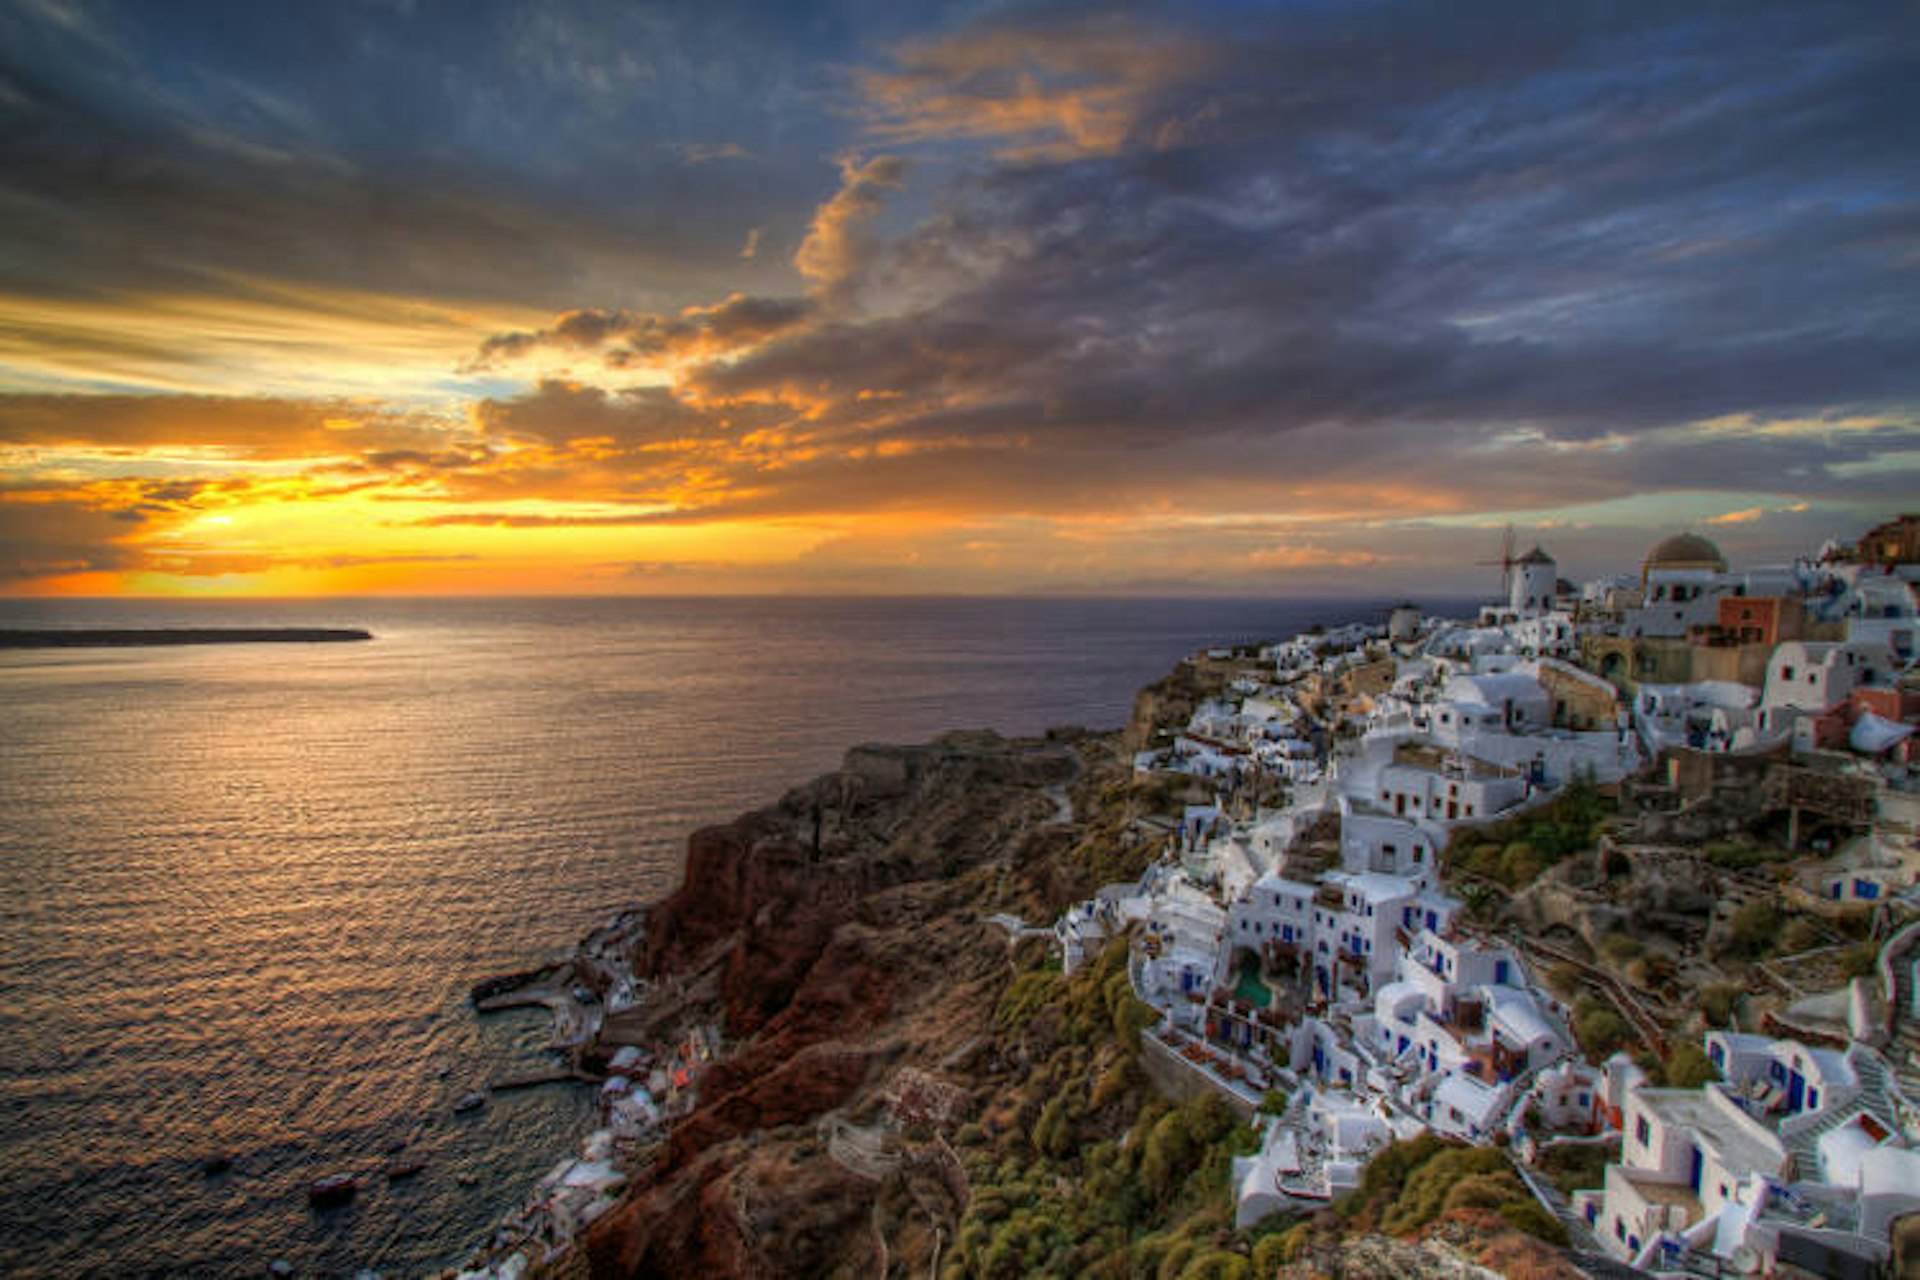 The famous Santorini sunset is reason enough to go to Greece. Image by Nikola Totuhov / CC BY-SA 2.0